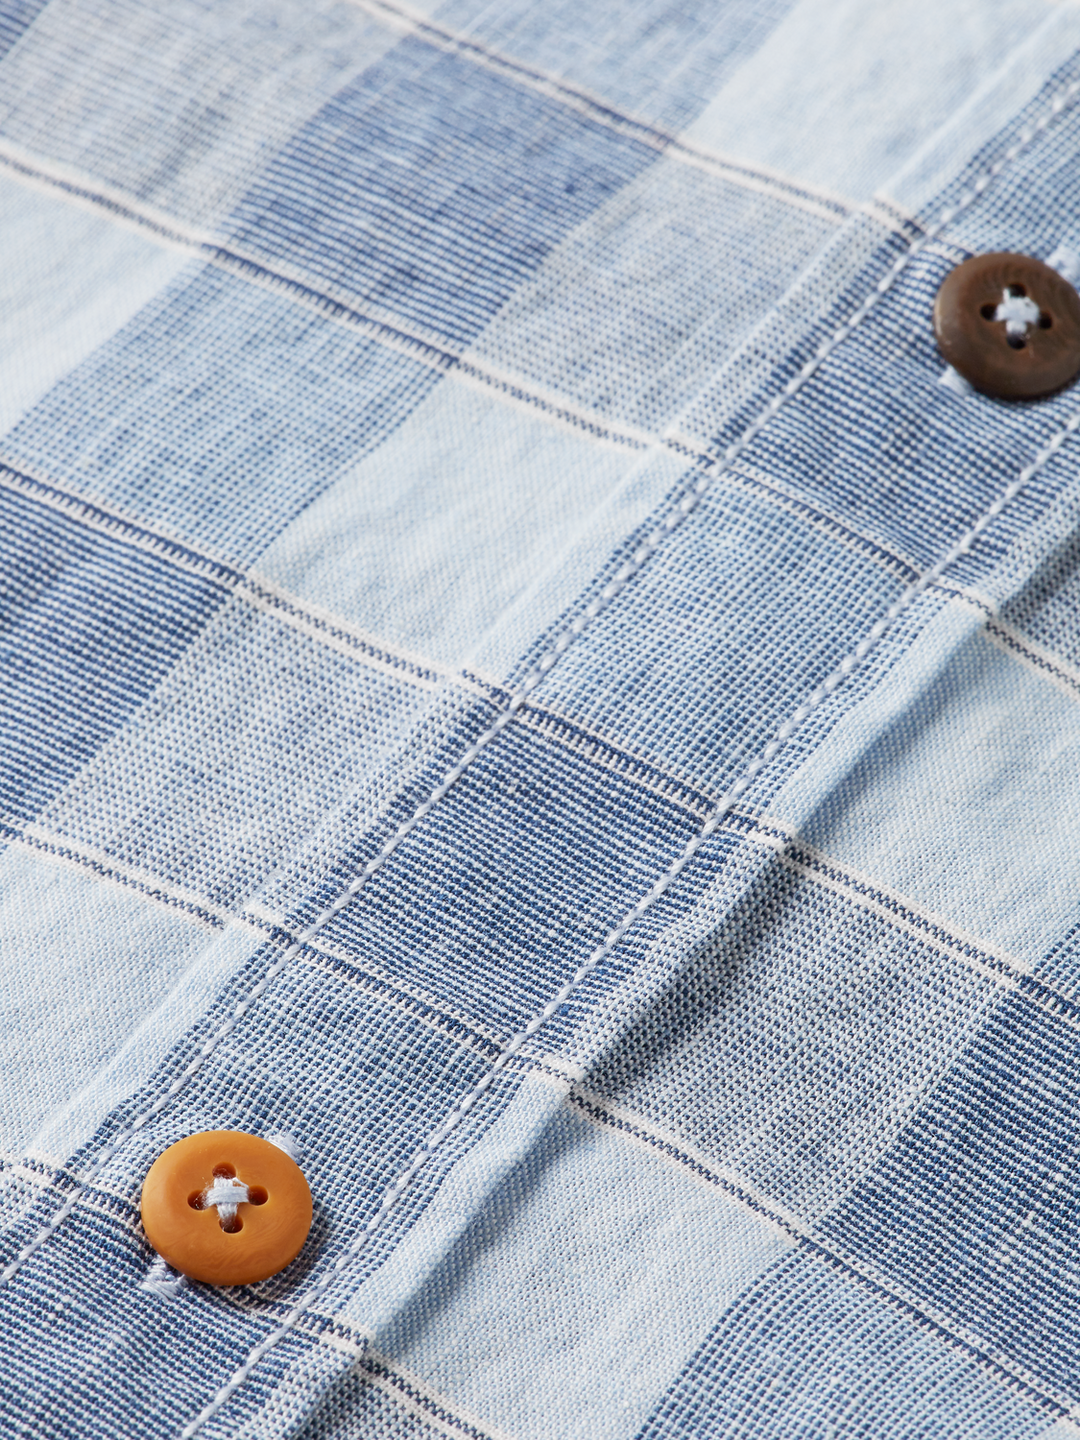 Yarn Dyed Linen-Blended Shirt Combo C 0219 | Buster McGee